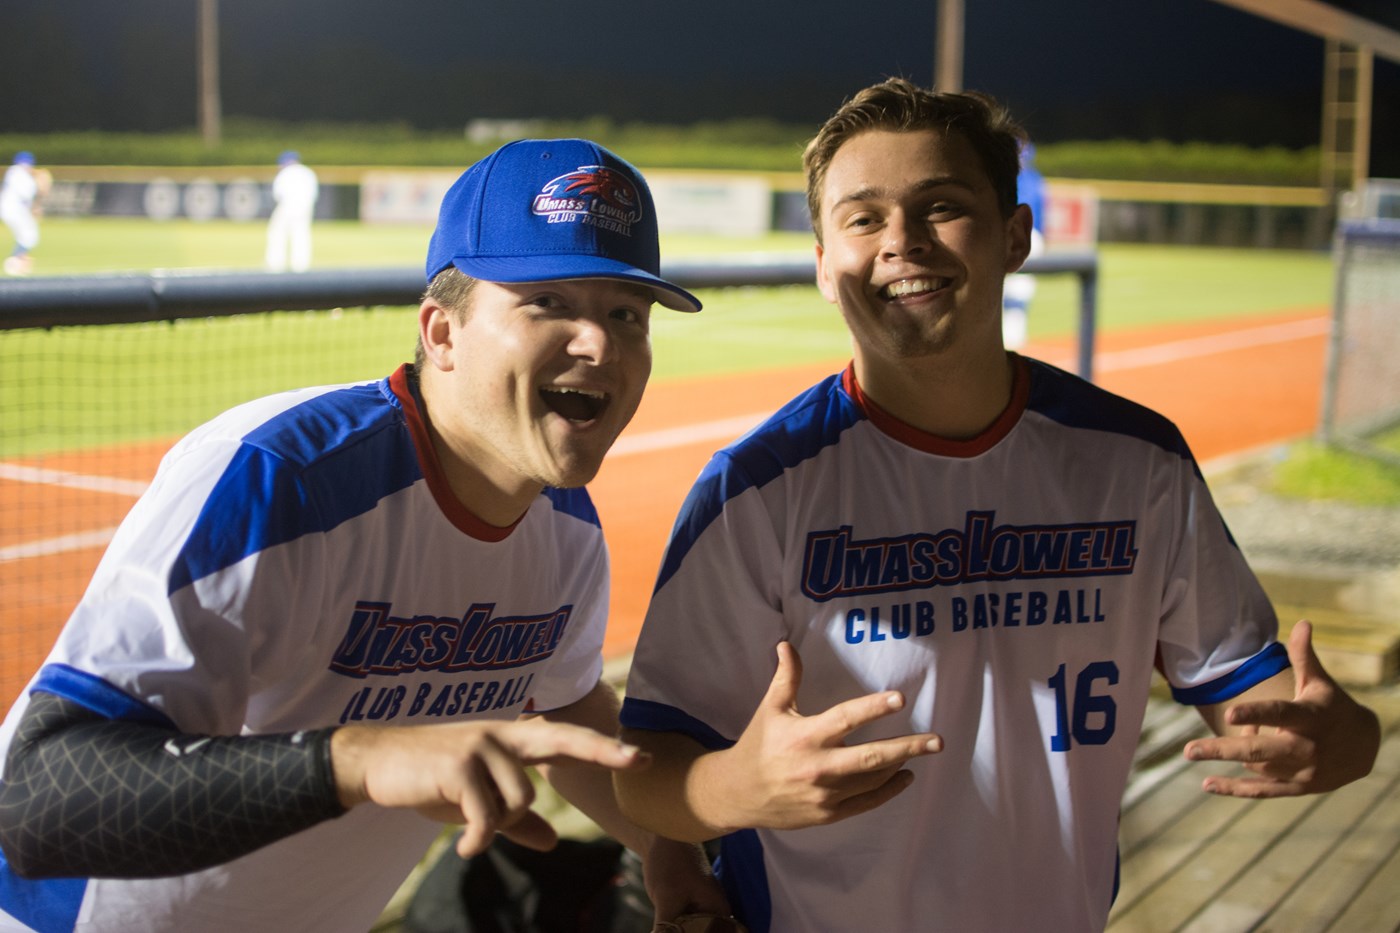 2 students posing from the Men's Club Baseball team.